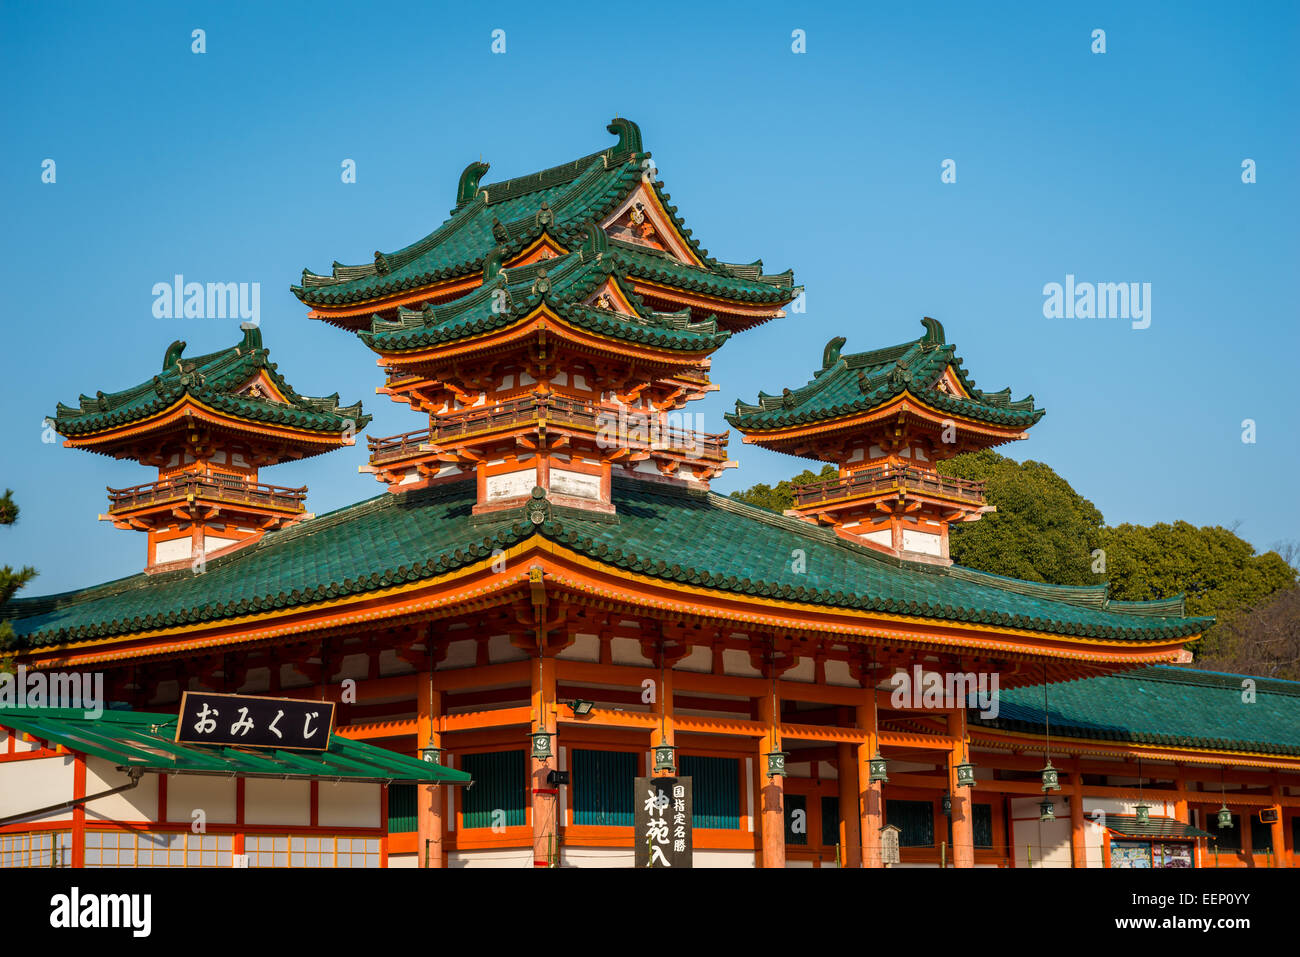 Traditional Japanese architecture on display at Heian Shrine in Kyoto, Japan. Stock Photo